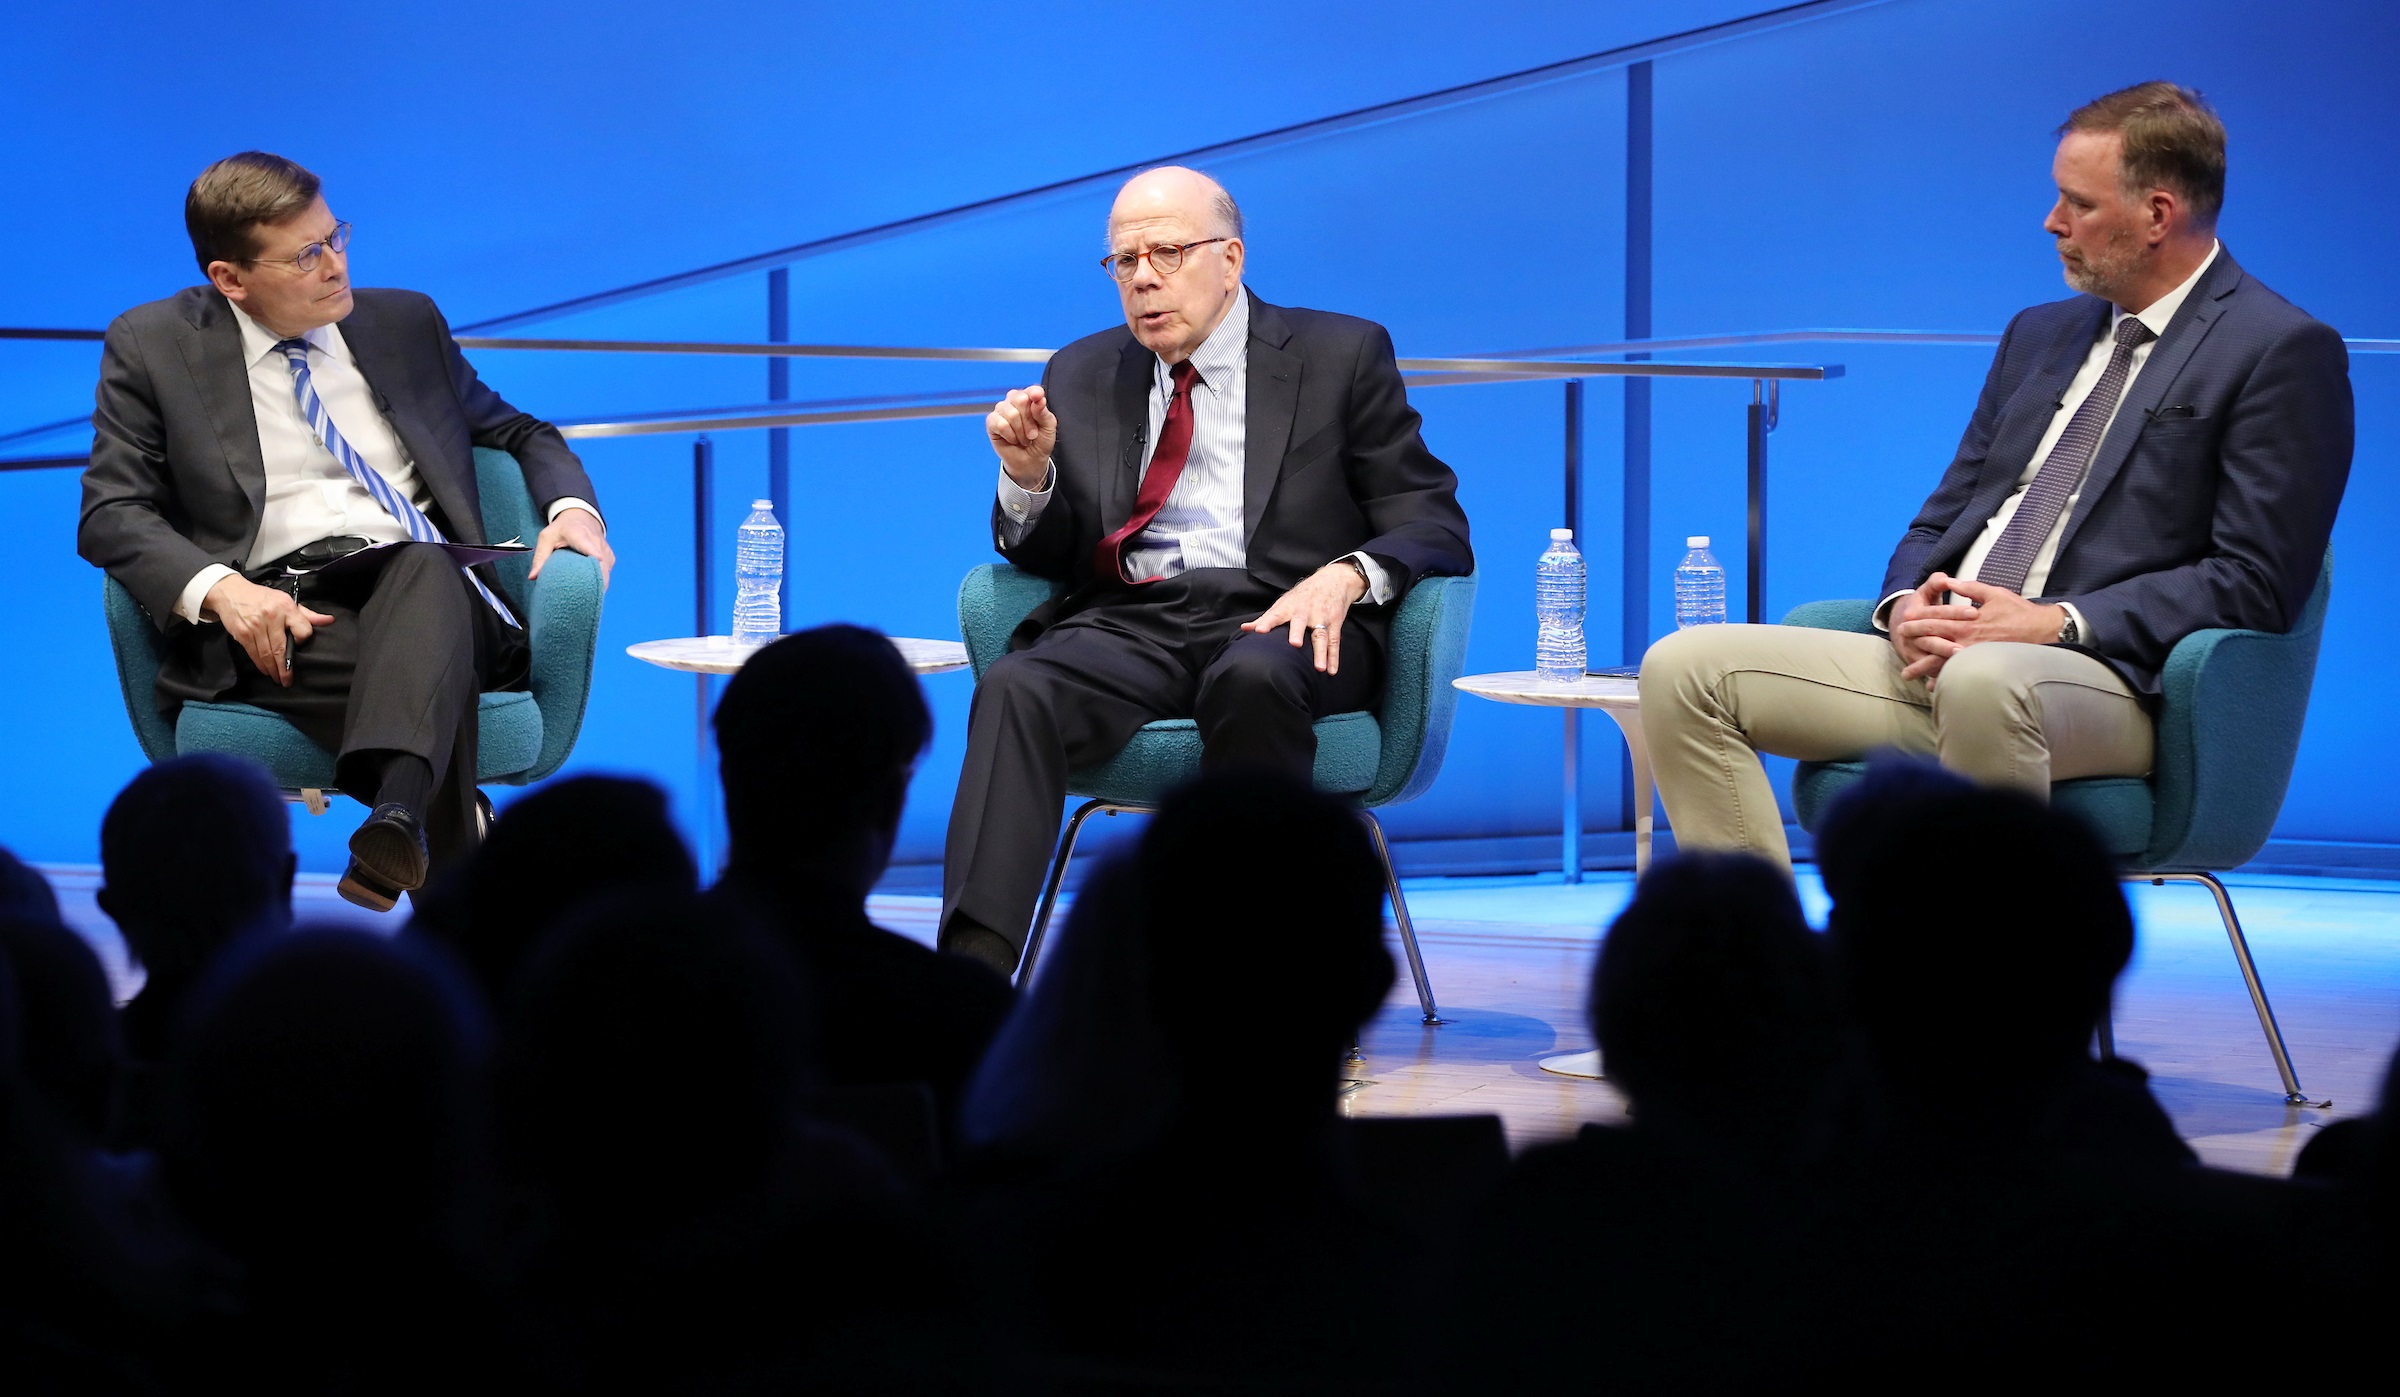 Former Acting CIA Directors John McLaughlin and Michael Morell and former CIA Senior Paramilitary Officer Phil Reilly participate in a public program onstage at the 9/11 Memorial Museum auditorium.